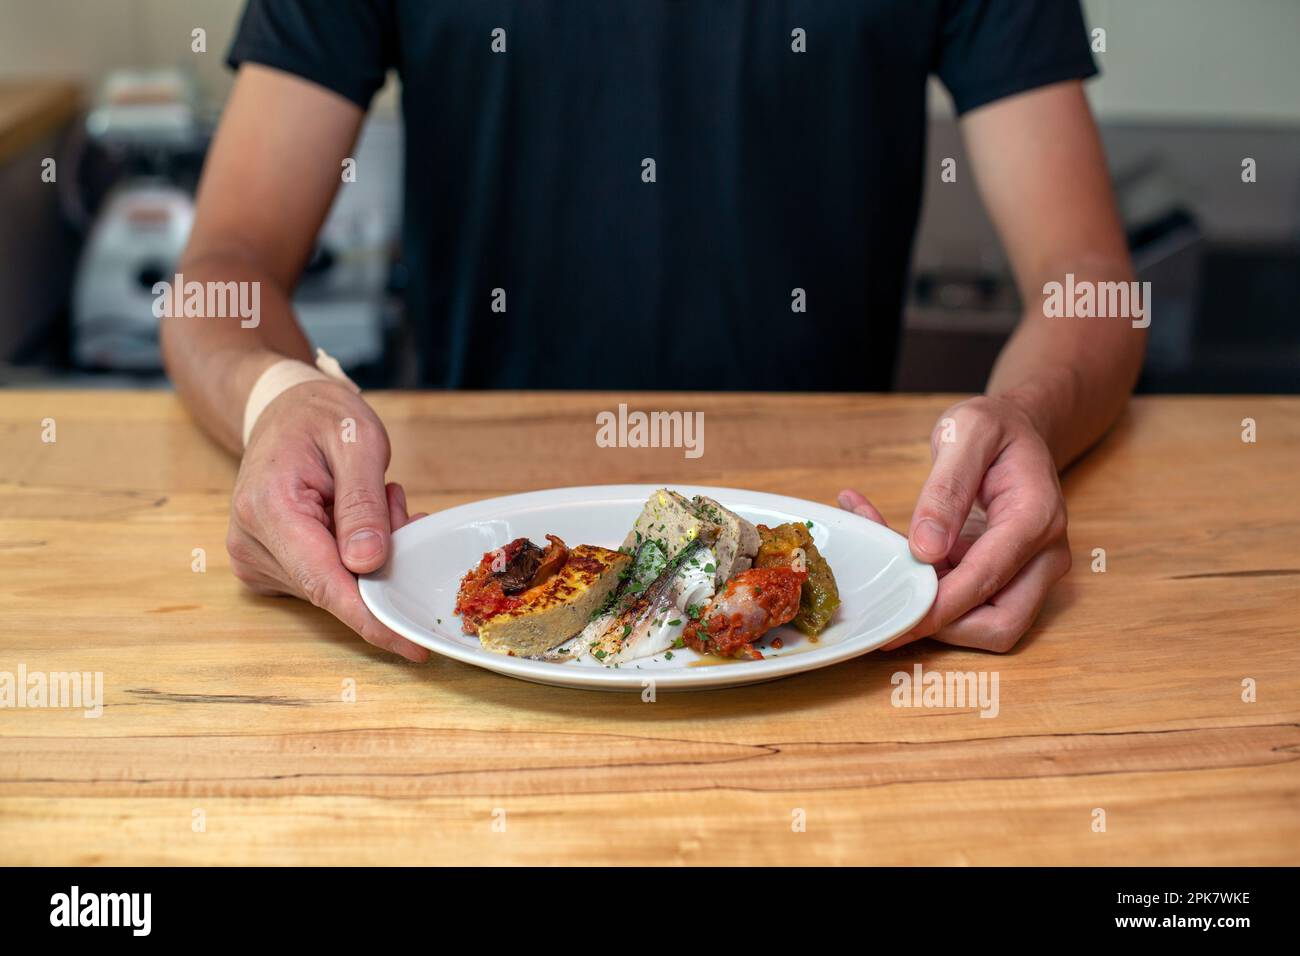 A man standing at a restaurant counter presenting plates of cooked food, menu dishes. Stock Photo